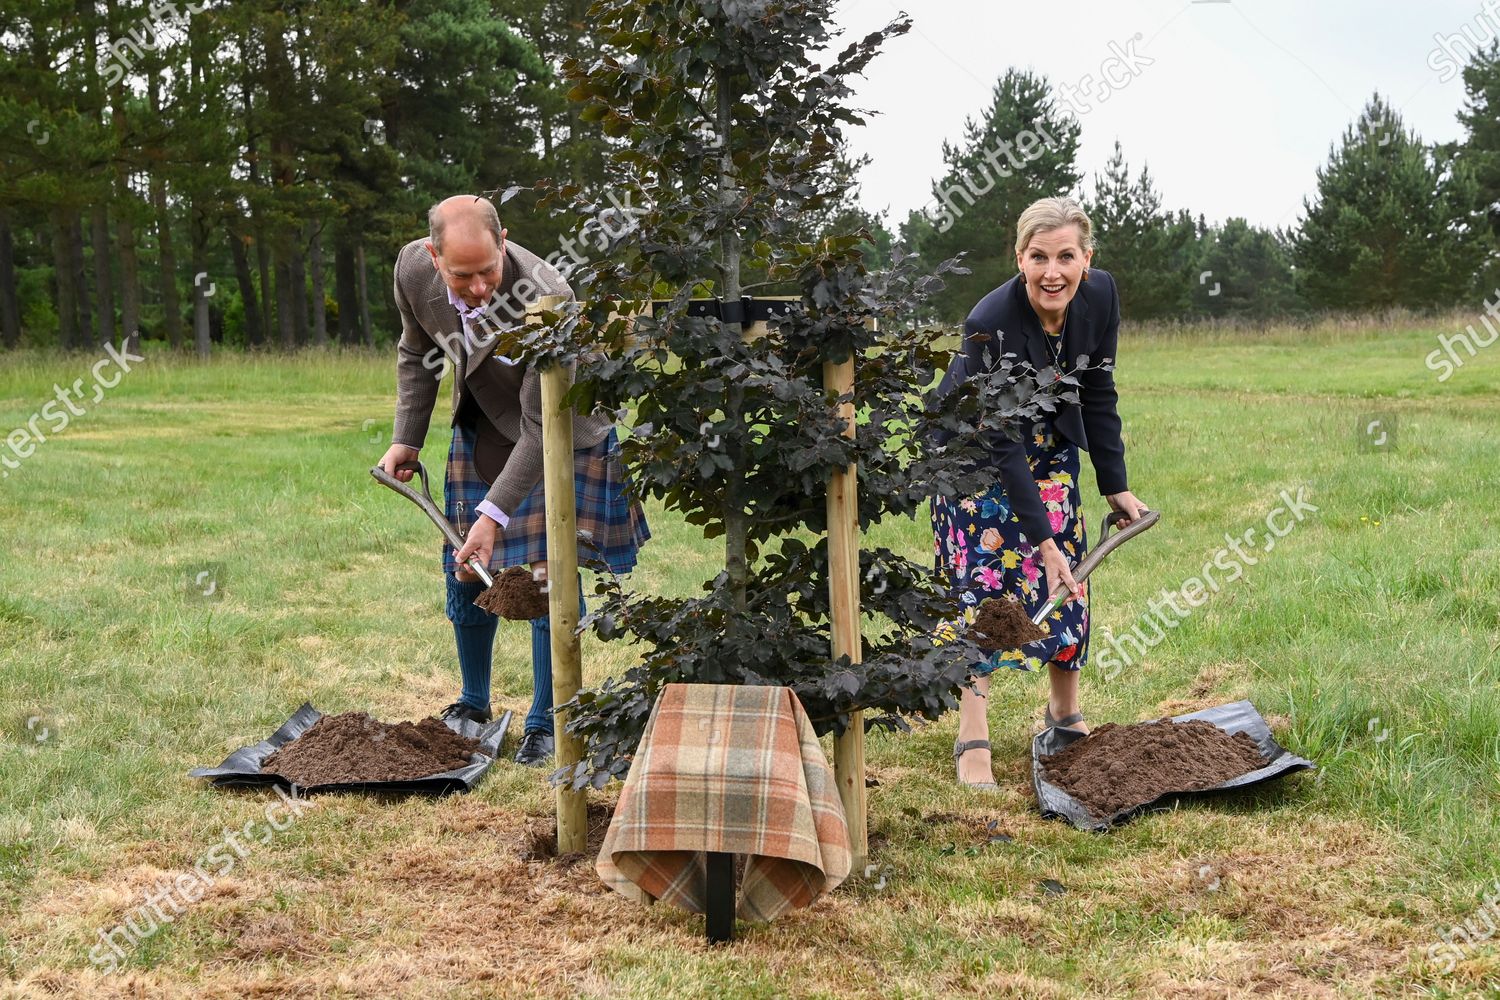 CASA REAL BRITÁNICA - Página 76 Prince-edward-and-sophie-countess-of-wessex-visit-to-forfar-golf-club-scotland-uk-shutterstock-editorial-12172307bc